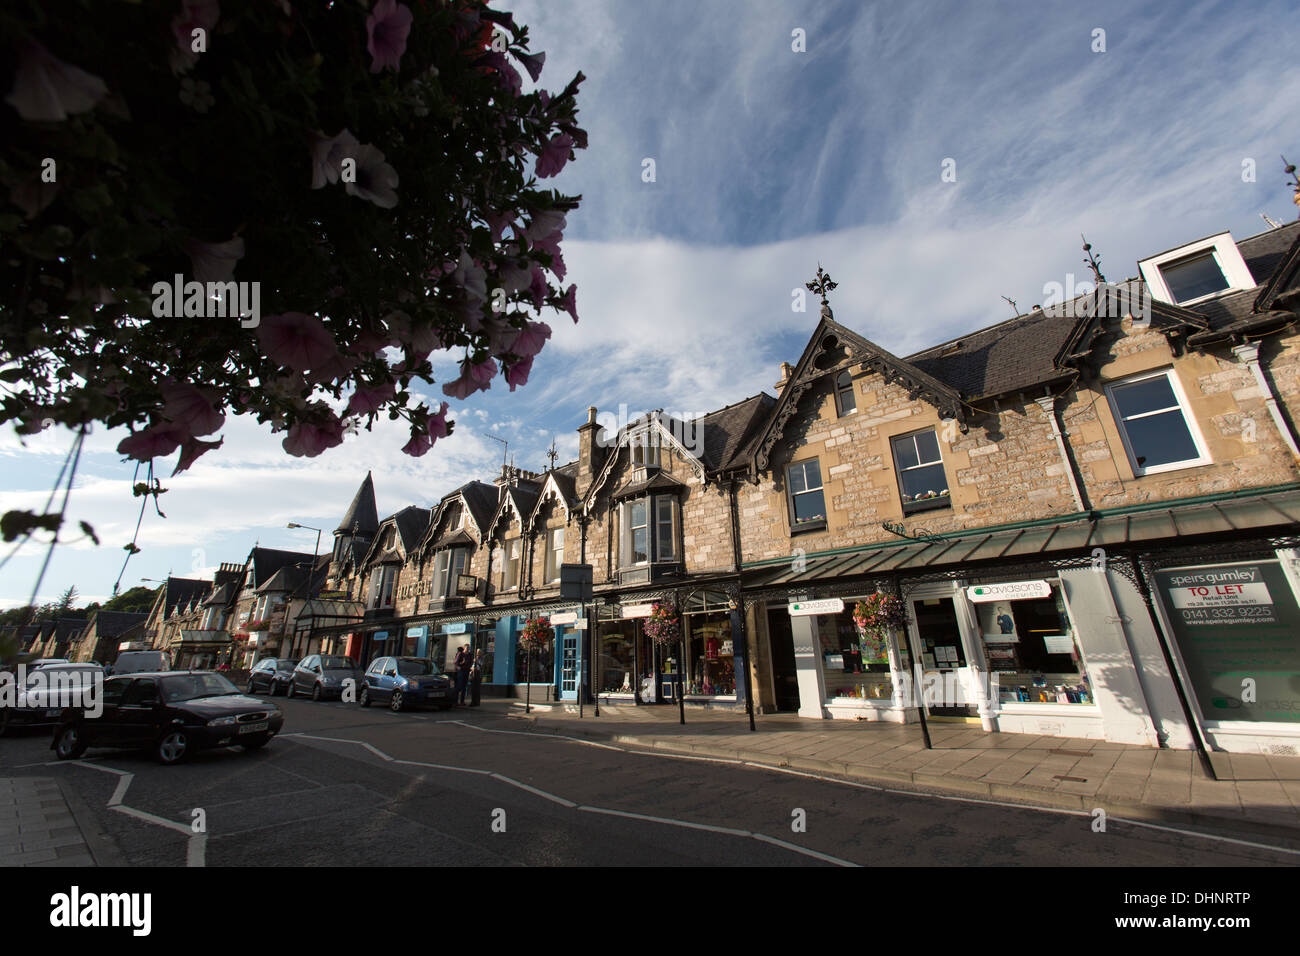 Town of Pitlochry, Scotland. Picturesque view of the cast iron canopy covered shops in Pitlochry’s town centre, on Atholl Road. Stock Photo